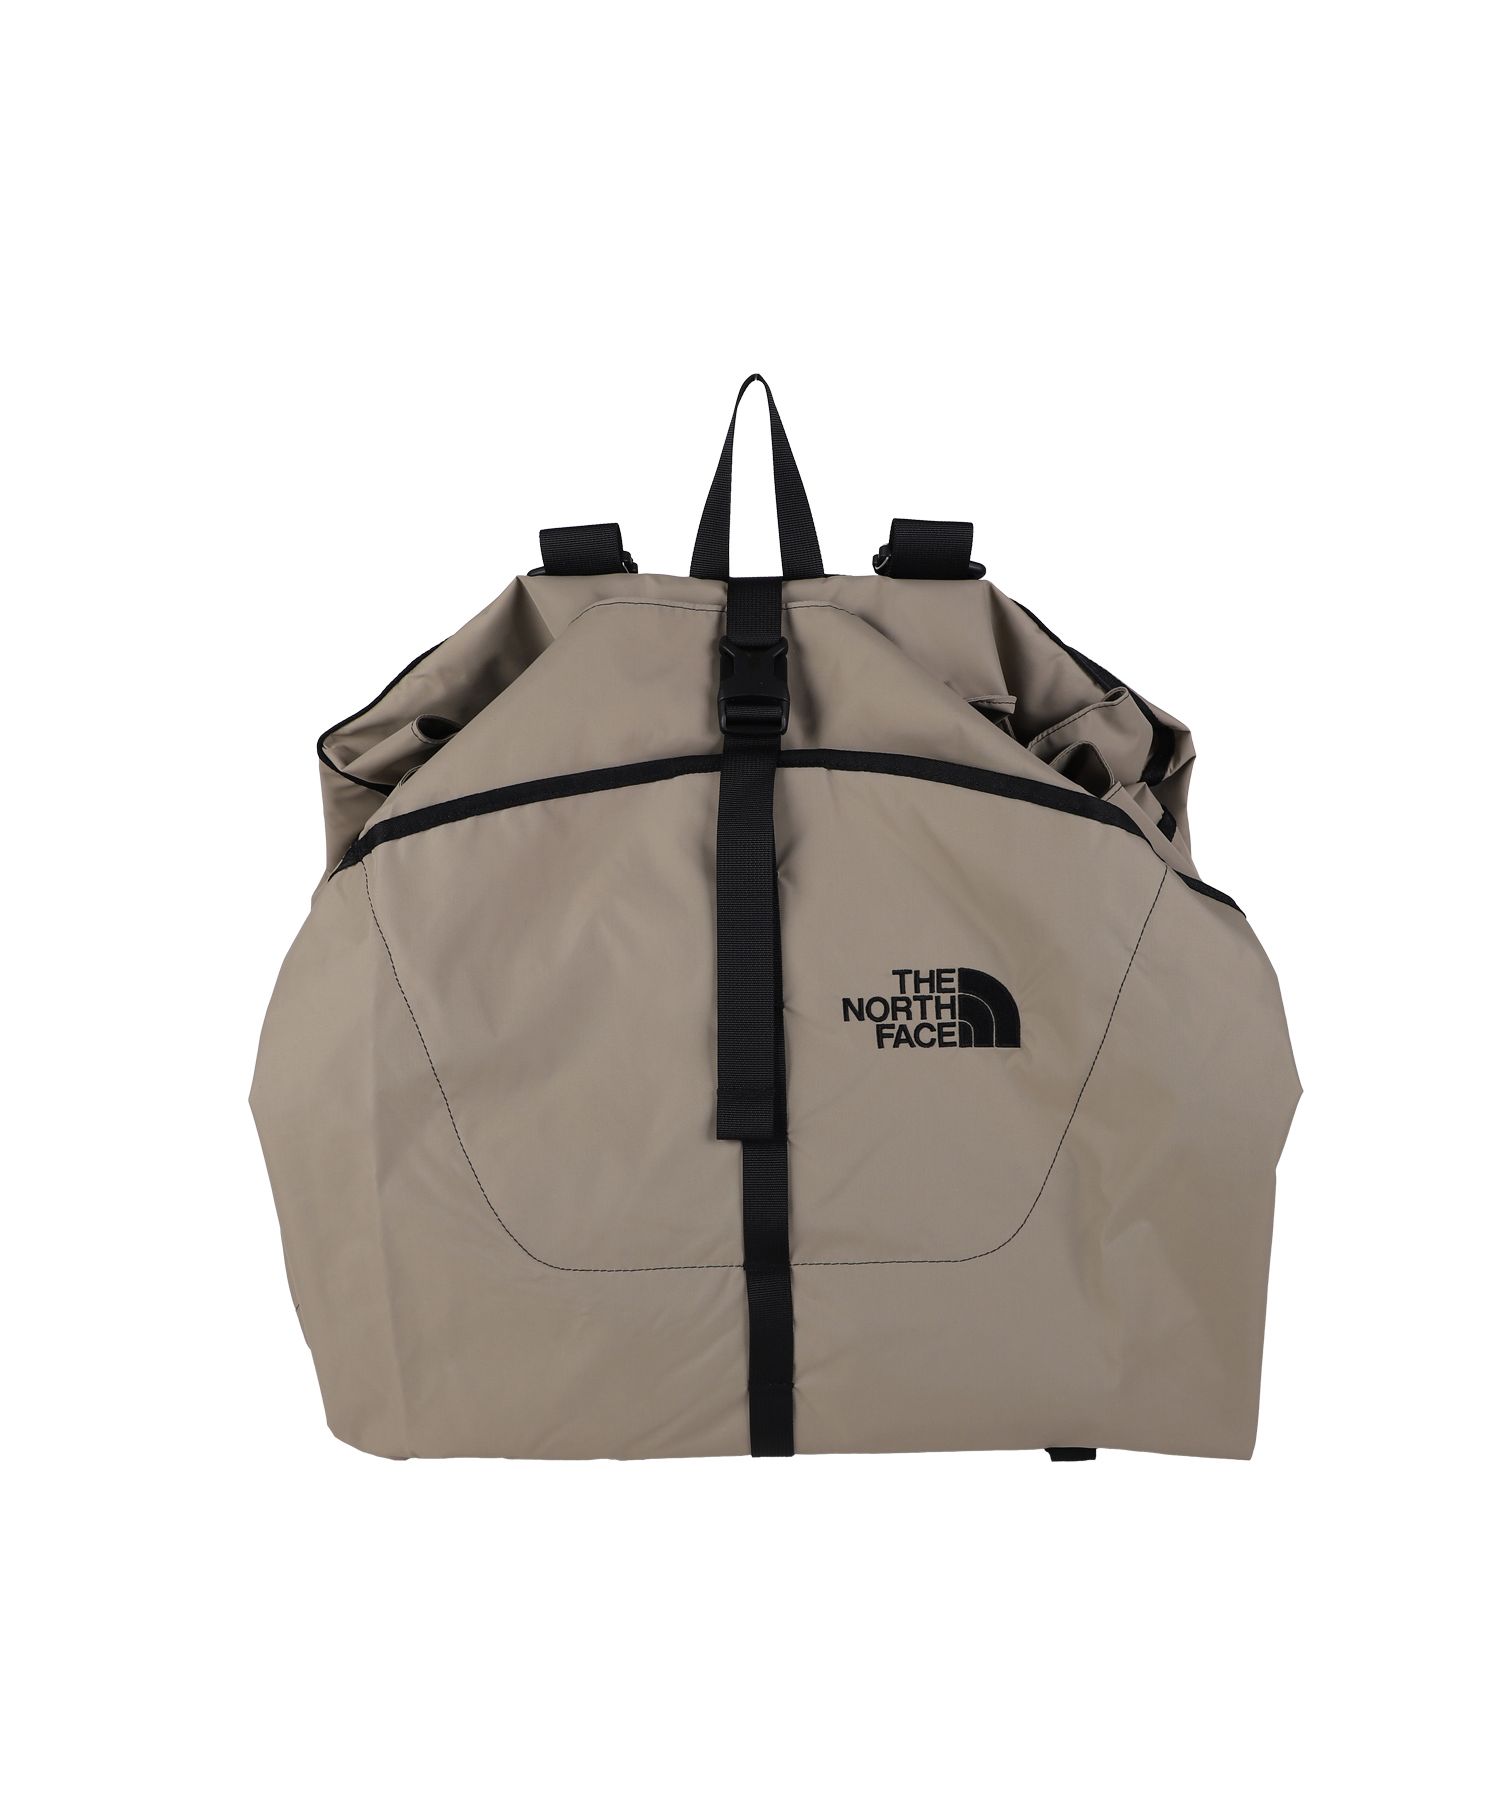 THE NORTH FACE Escape Pack 新品未使用